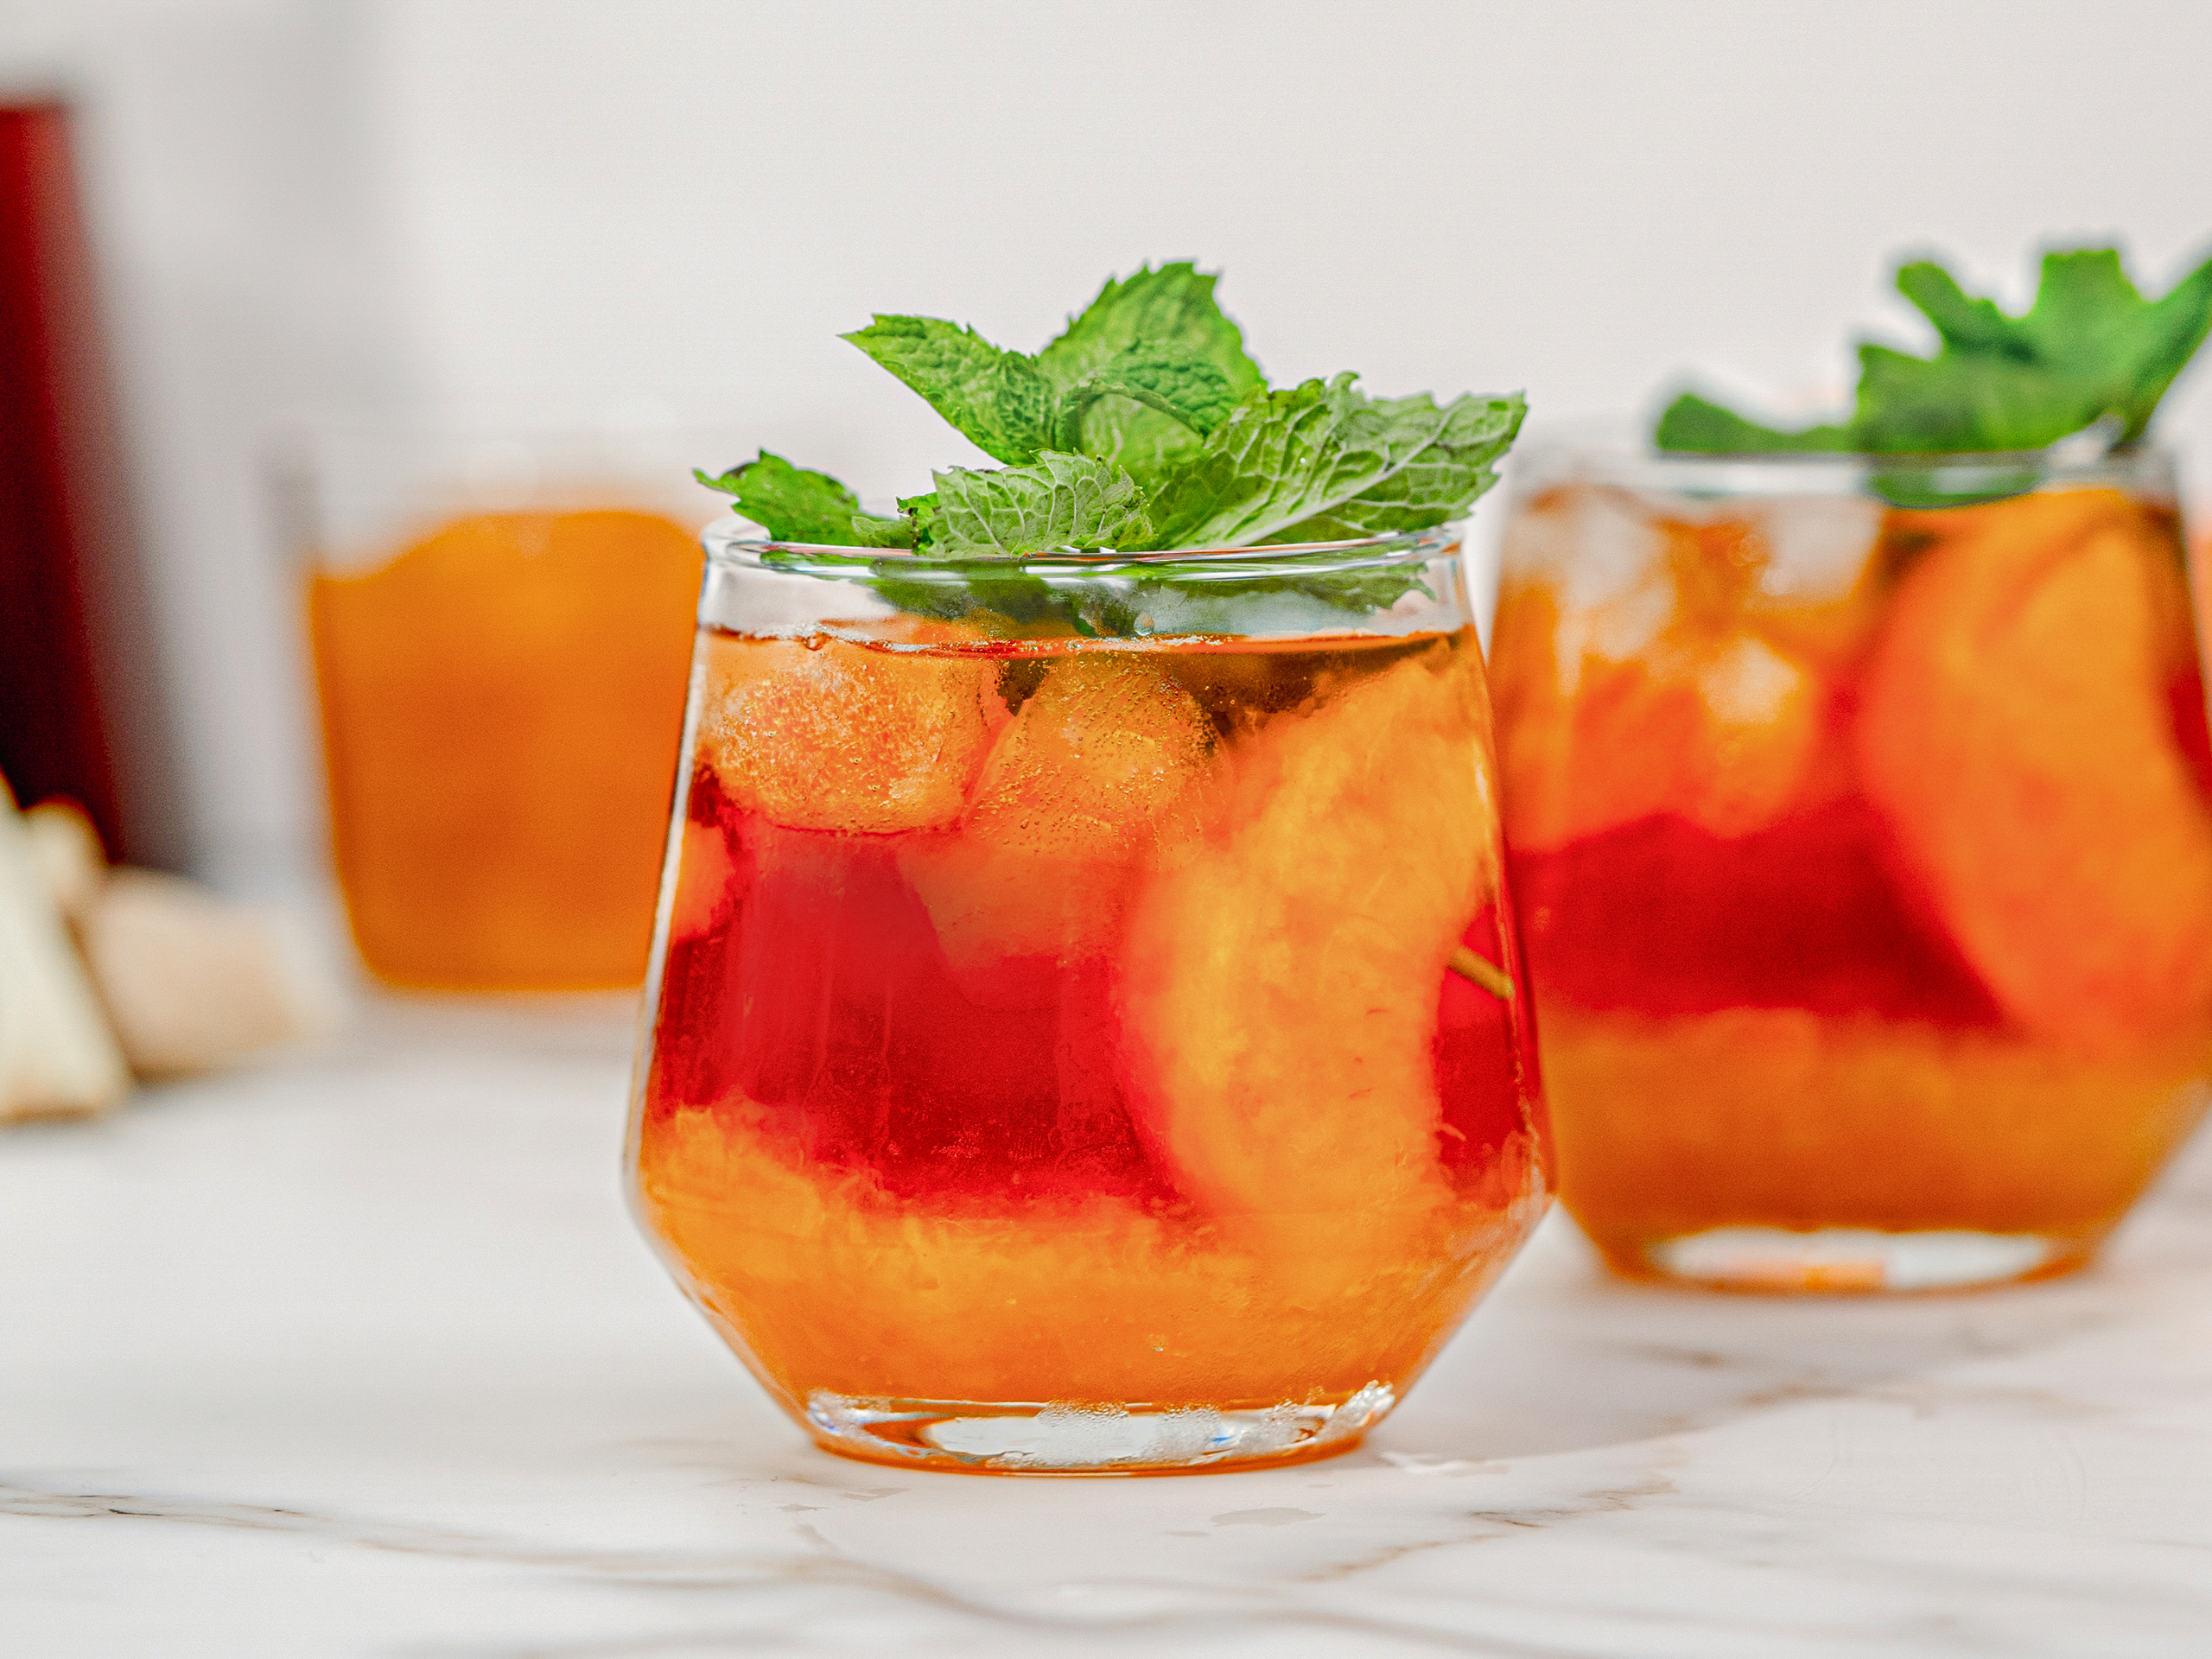 As the mercury rises, we take a look at five easy-to-make summer time cocktails to help you beat the heat.